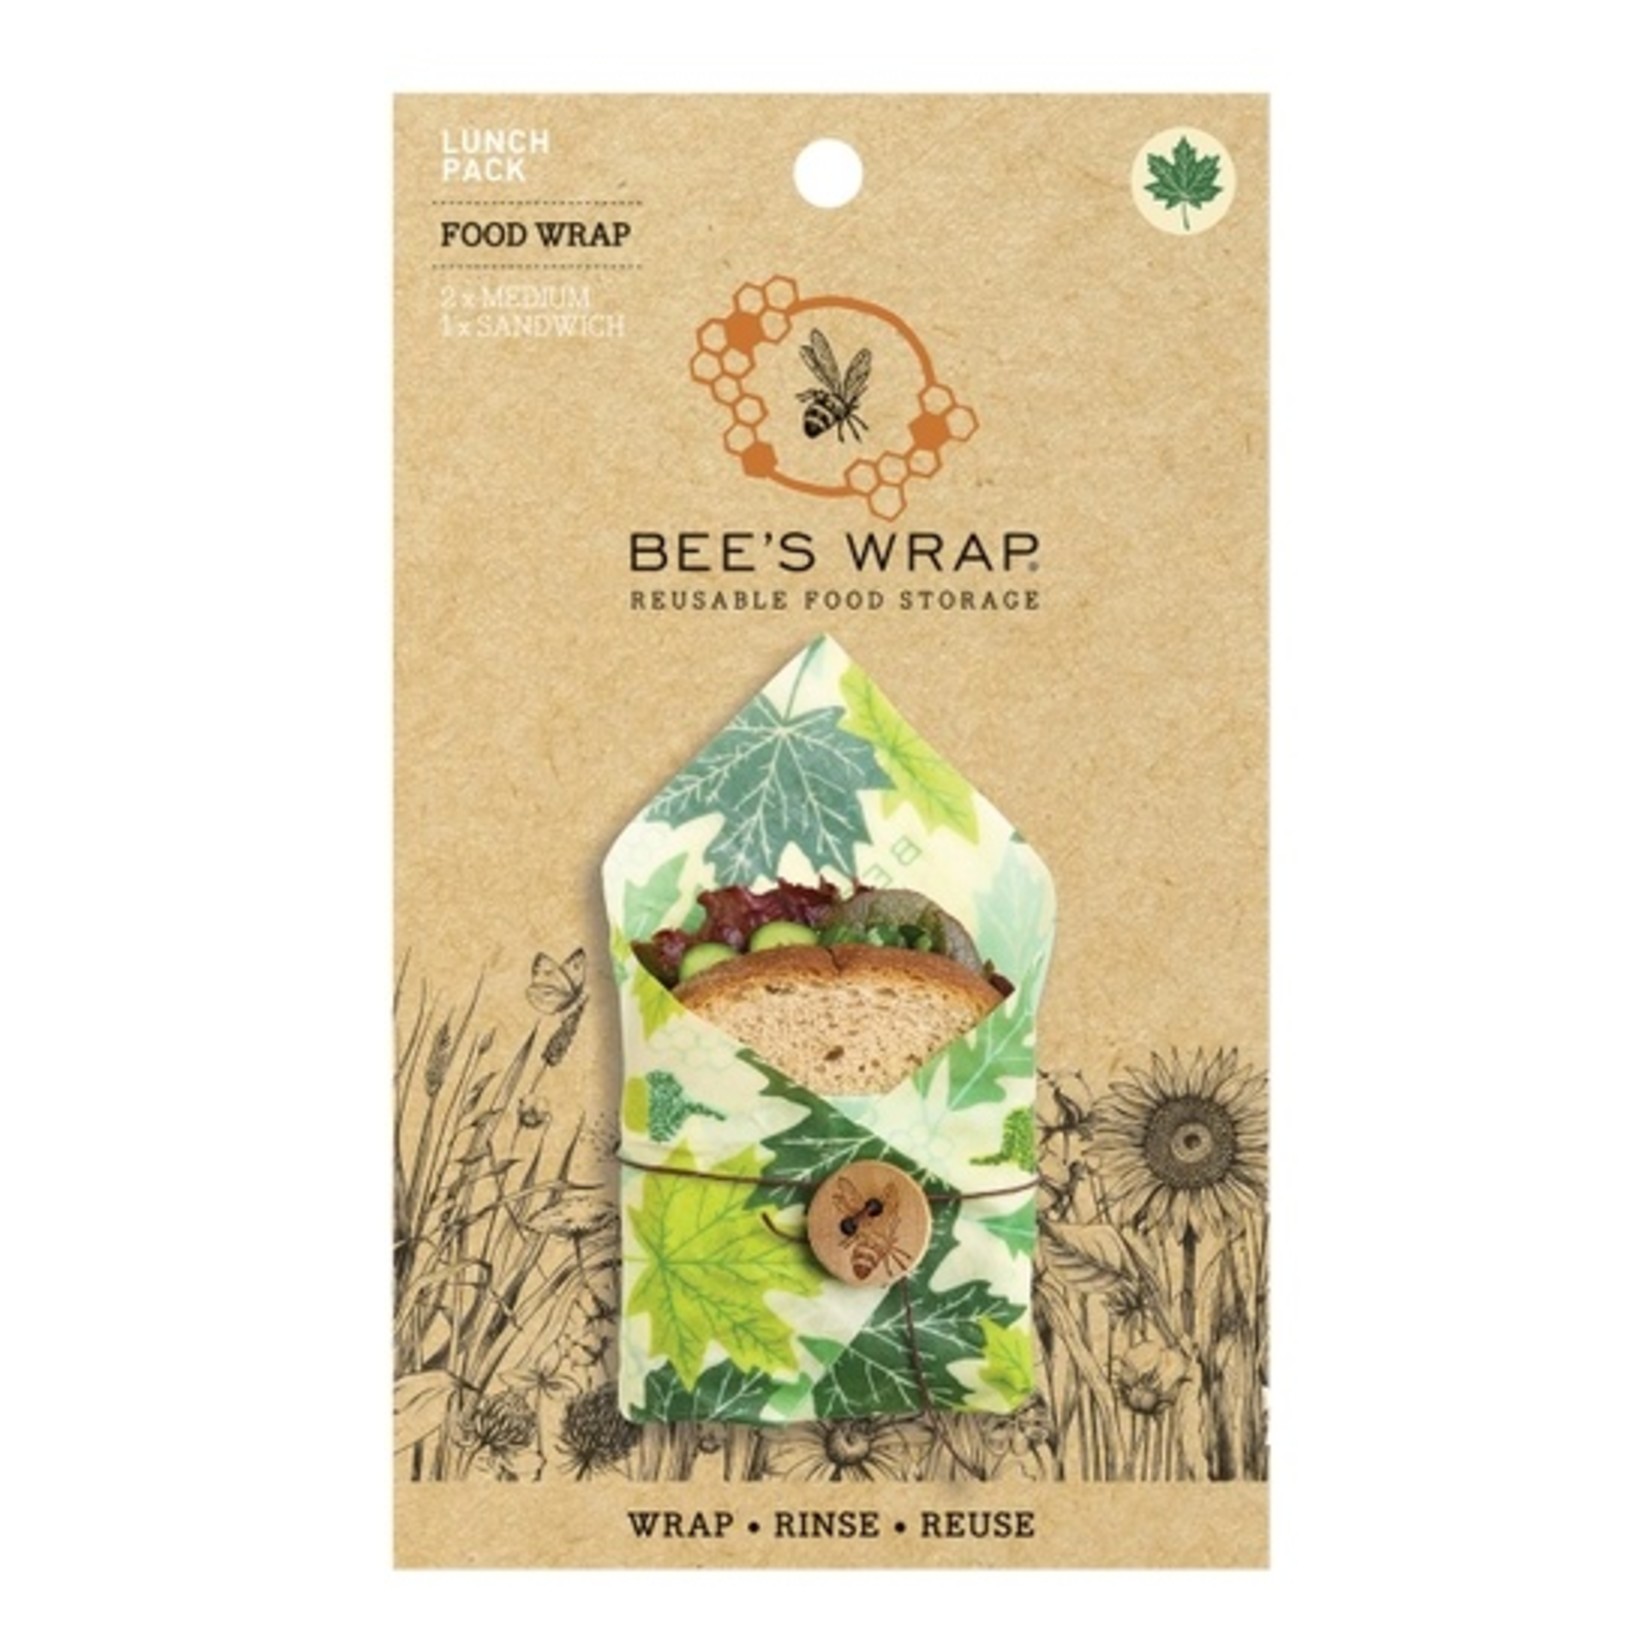 Bees Wrap Bees Wrap Lunch Pack in Forest Floor